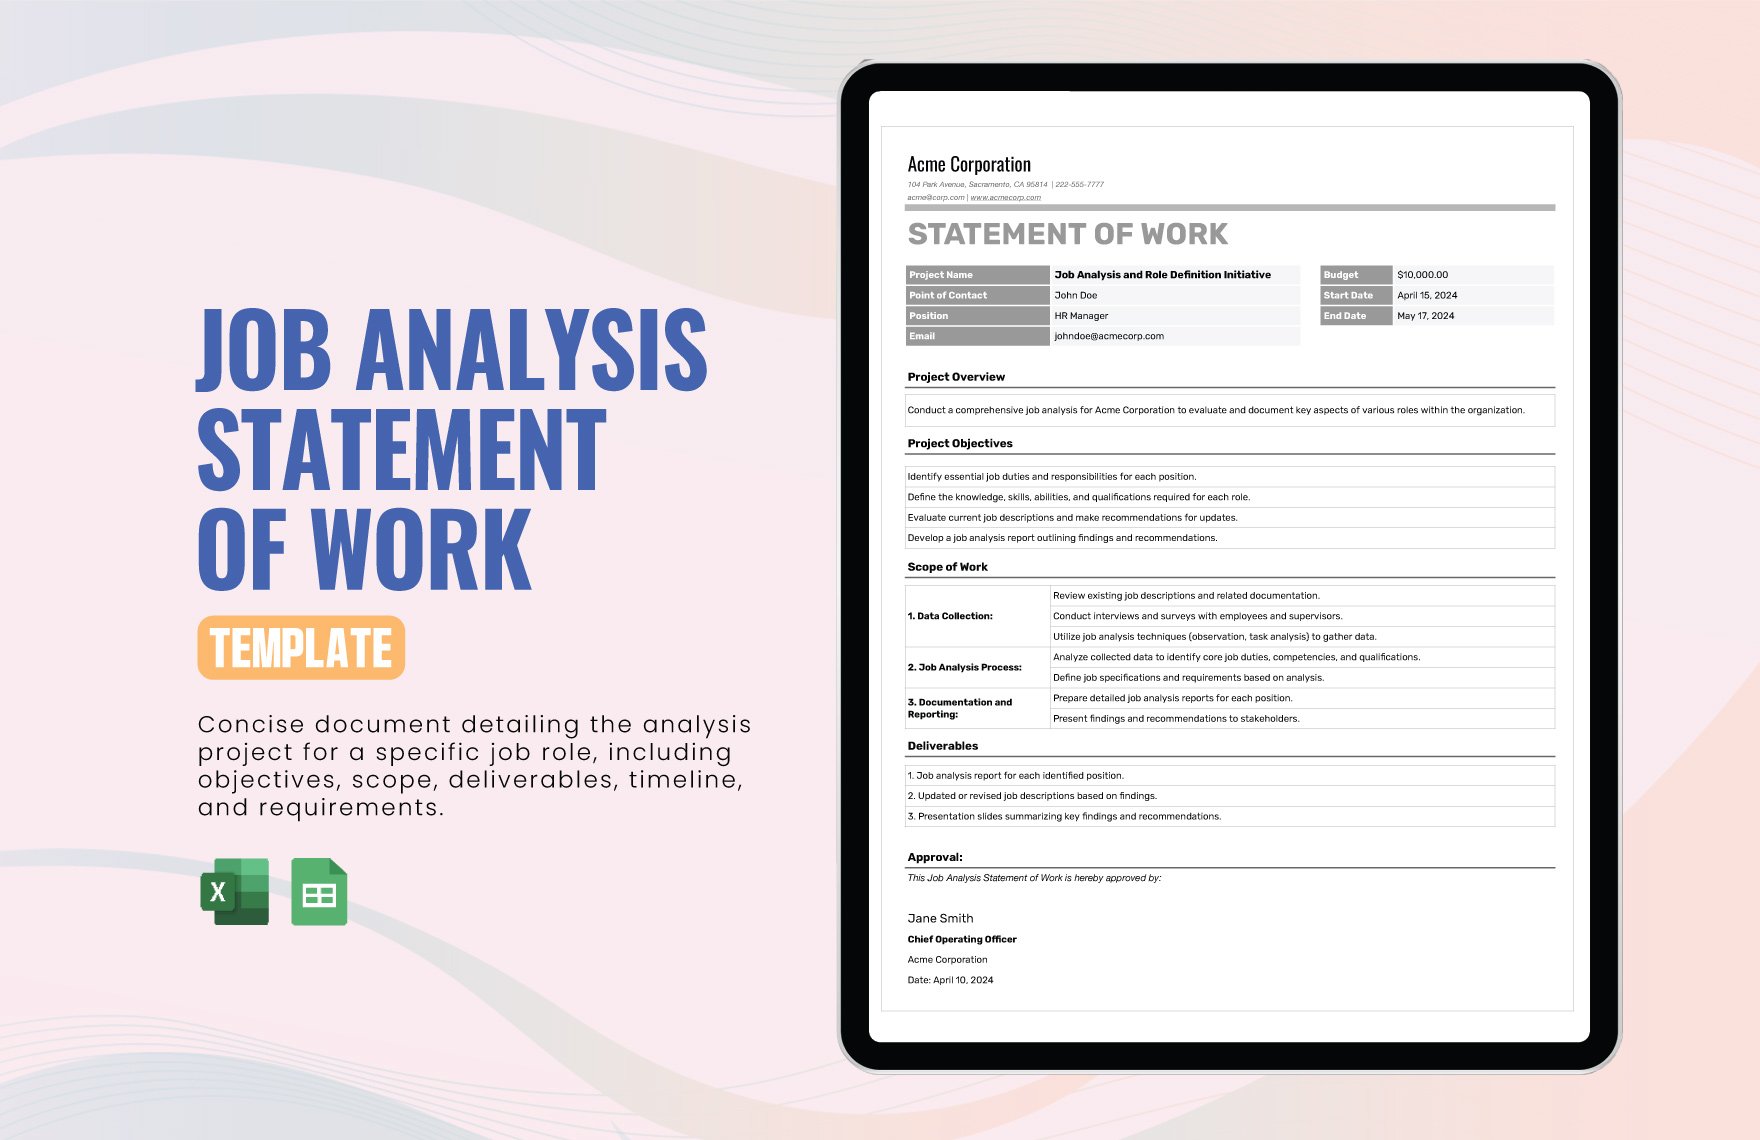 Job Analysis Statement of Work Template in Excel, Google Sheets